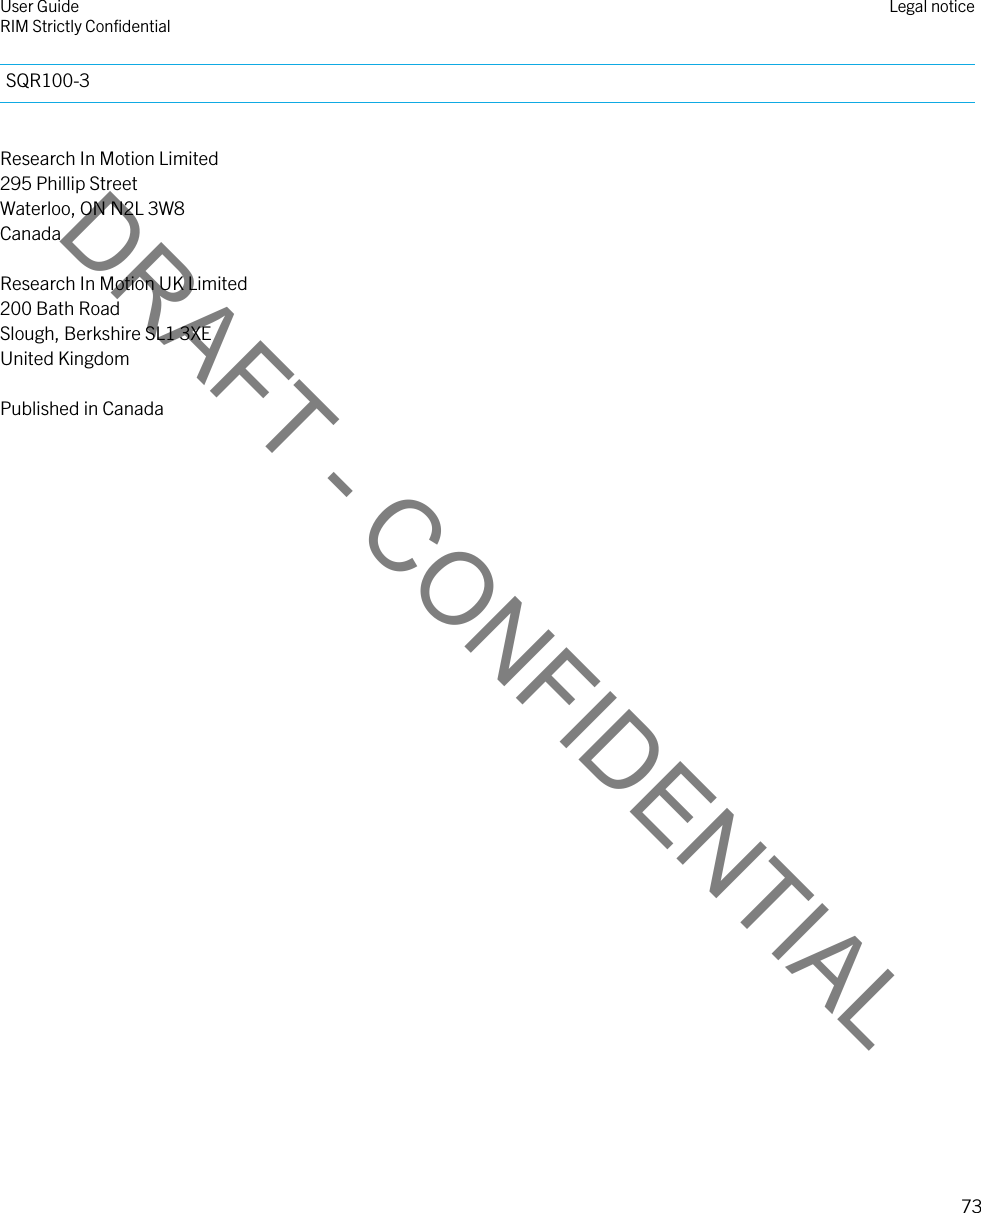 DRAFT - CONFIDENTIALSQR100-3Research In Motion Limited295 Phillip StreetWaterloo, ON N2L 3W8CanadaResearch In Motion UK Limited200 Bath RoadSlough, Berkshire SL1 3XEUnited KingdomPublished in CanadaUser GuideRIM Strictly Confidential Legal notice73 